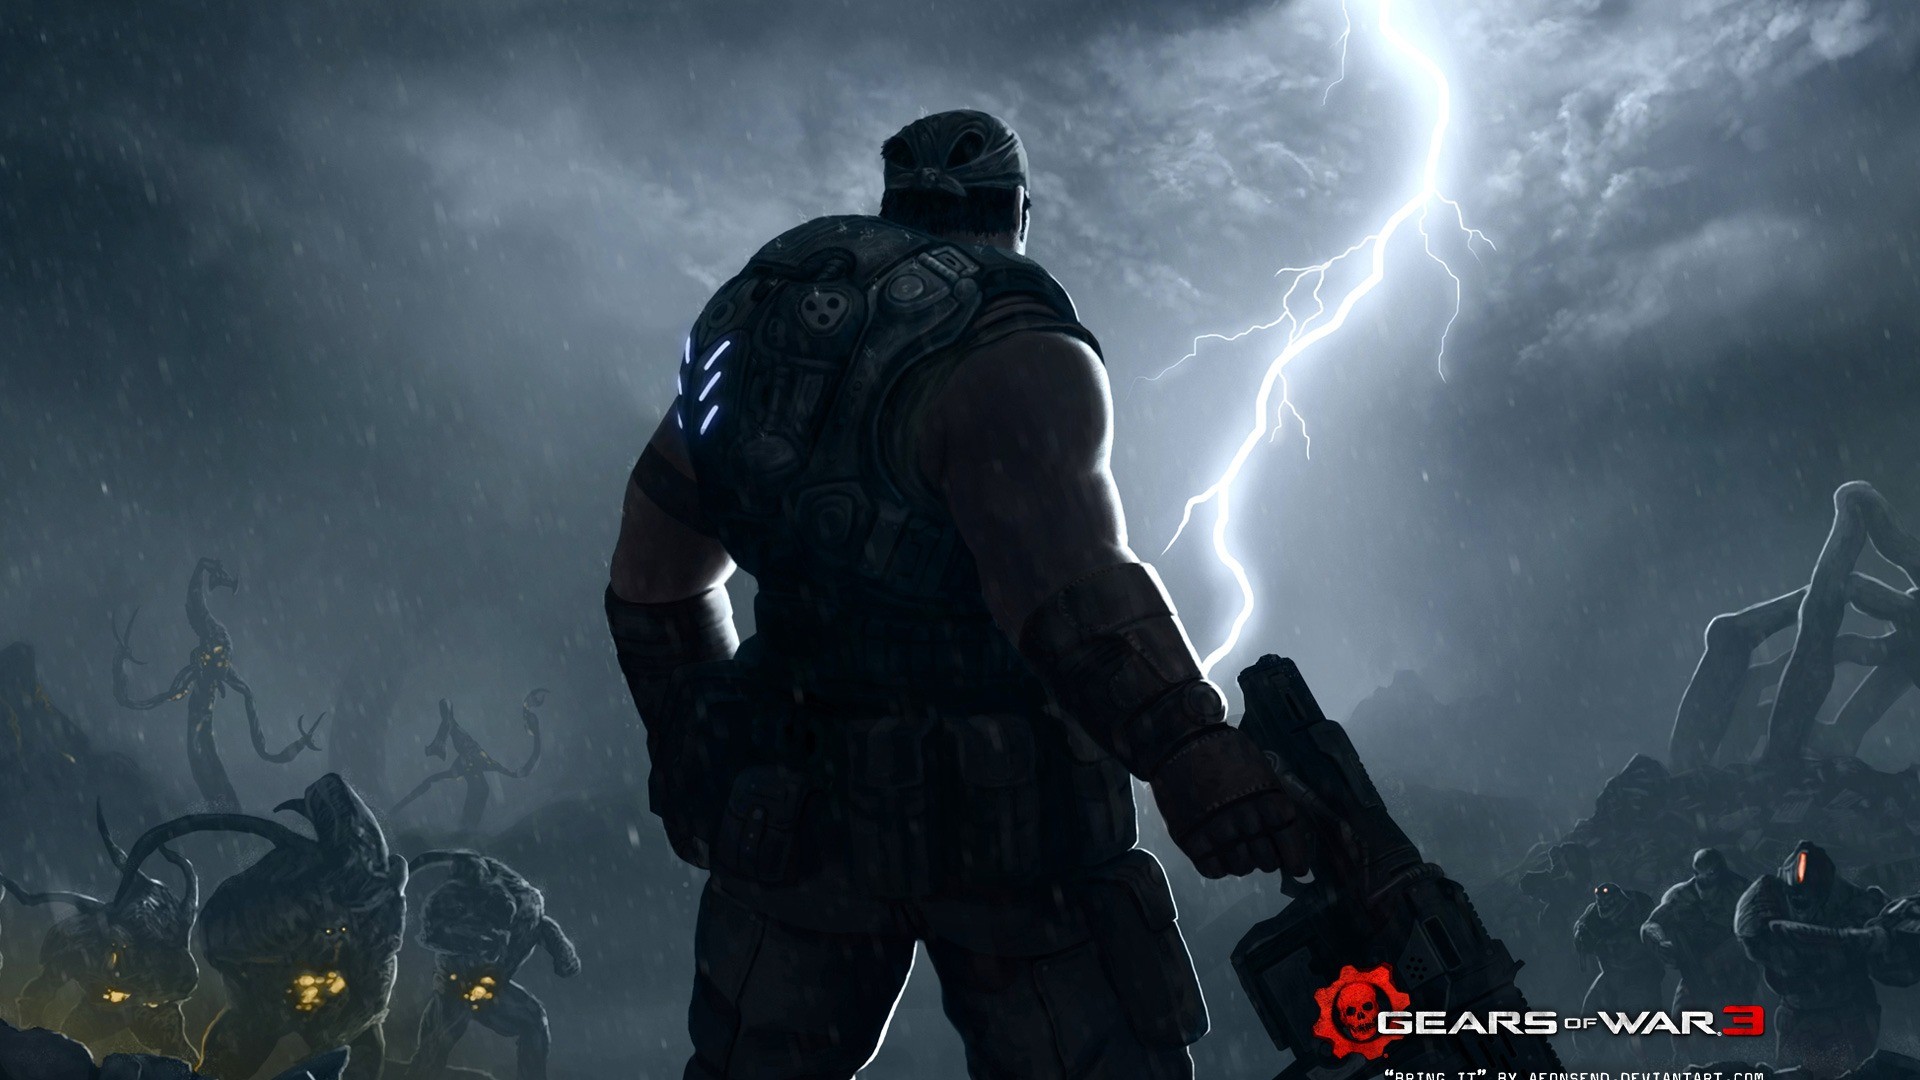 General 1920x1080 Gears of War video games Gears of War 3 video game characters Epic Games Xbox Game Studios